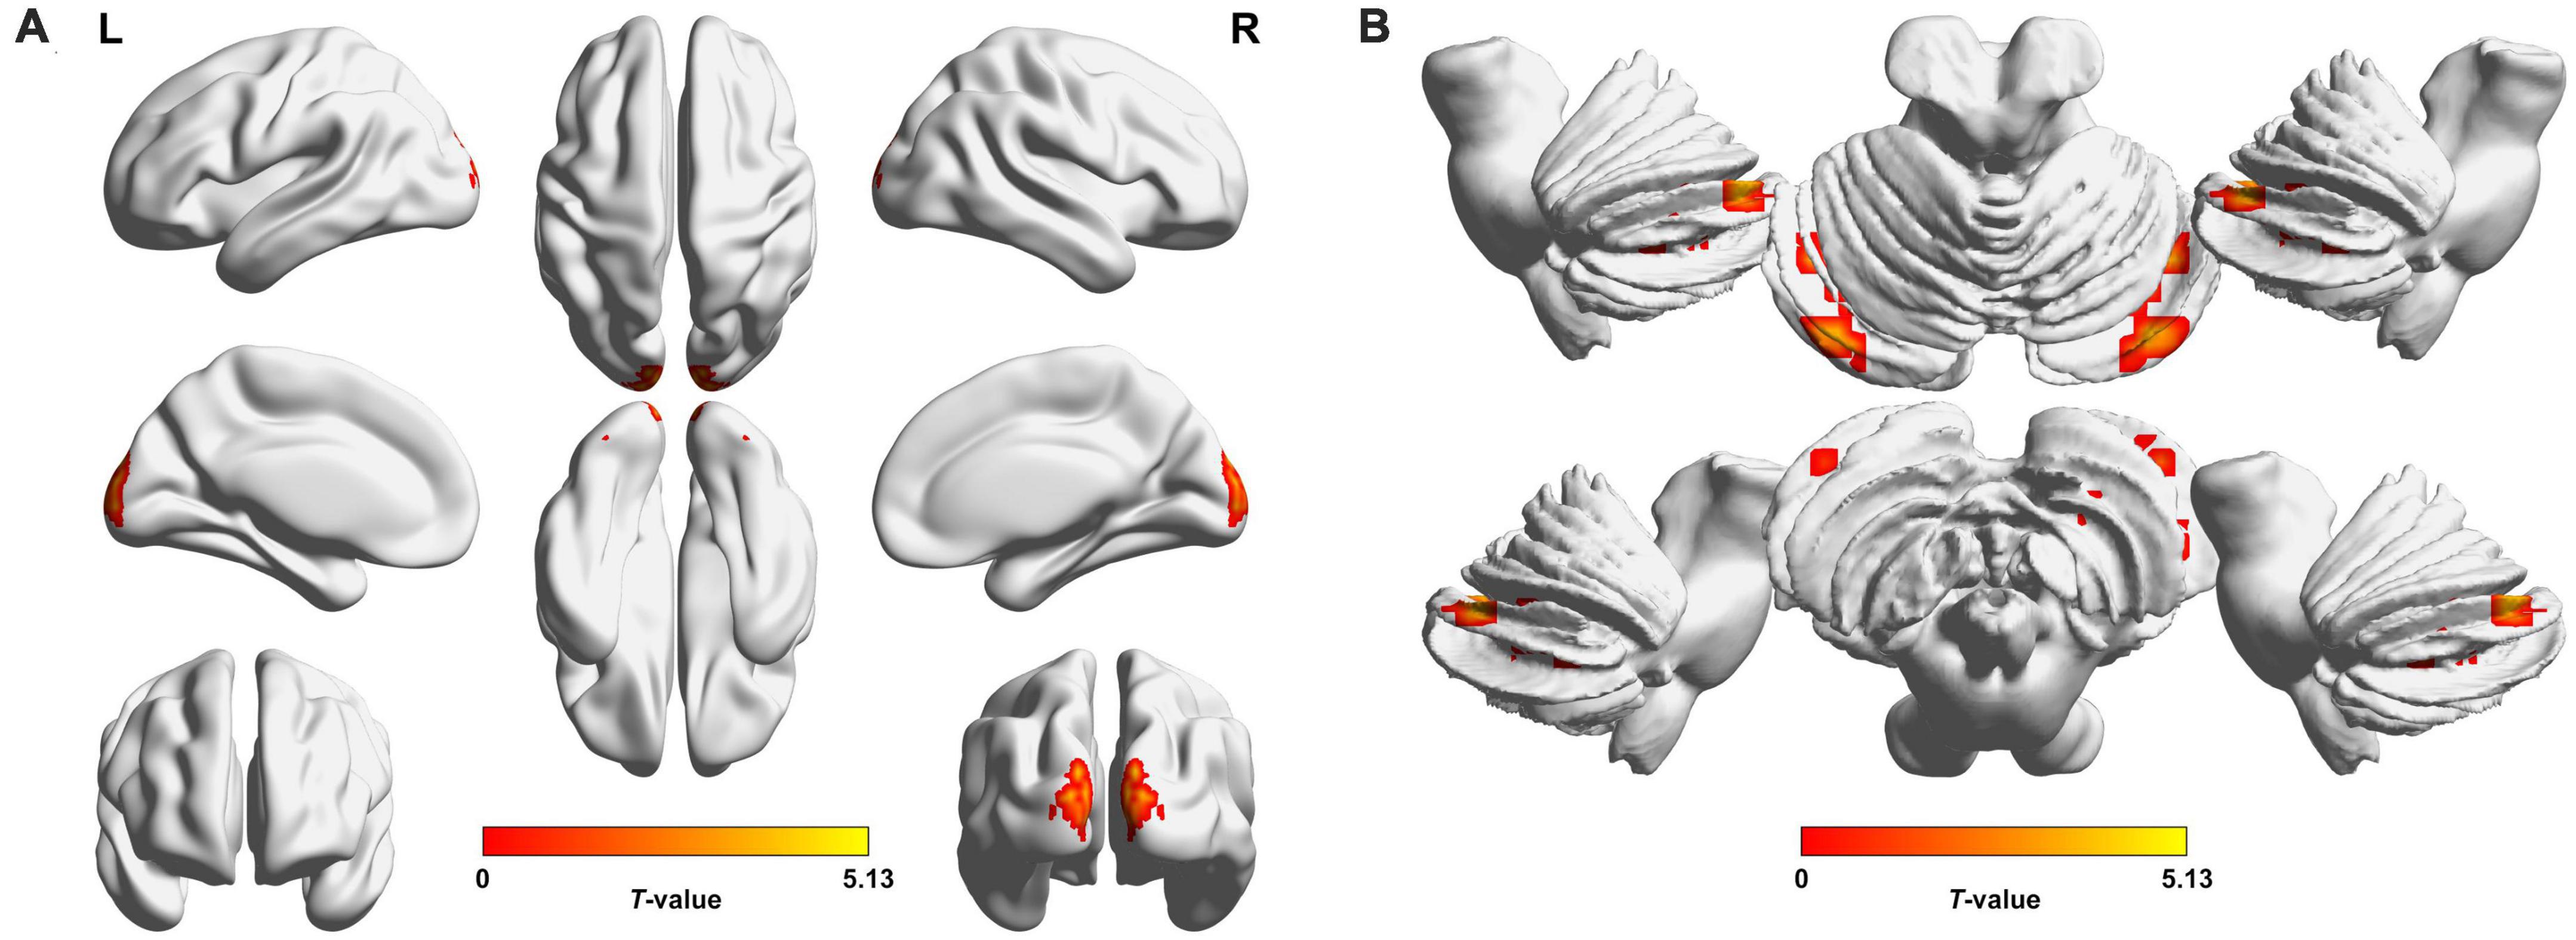 Frontiers  Morphometric and Functional Brain Connectivity